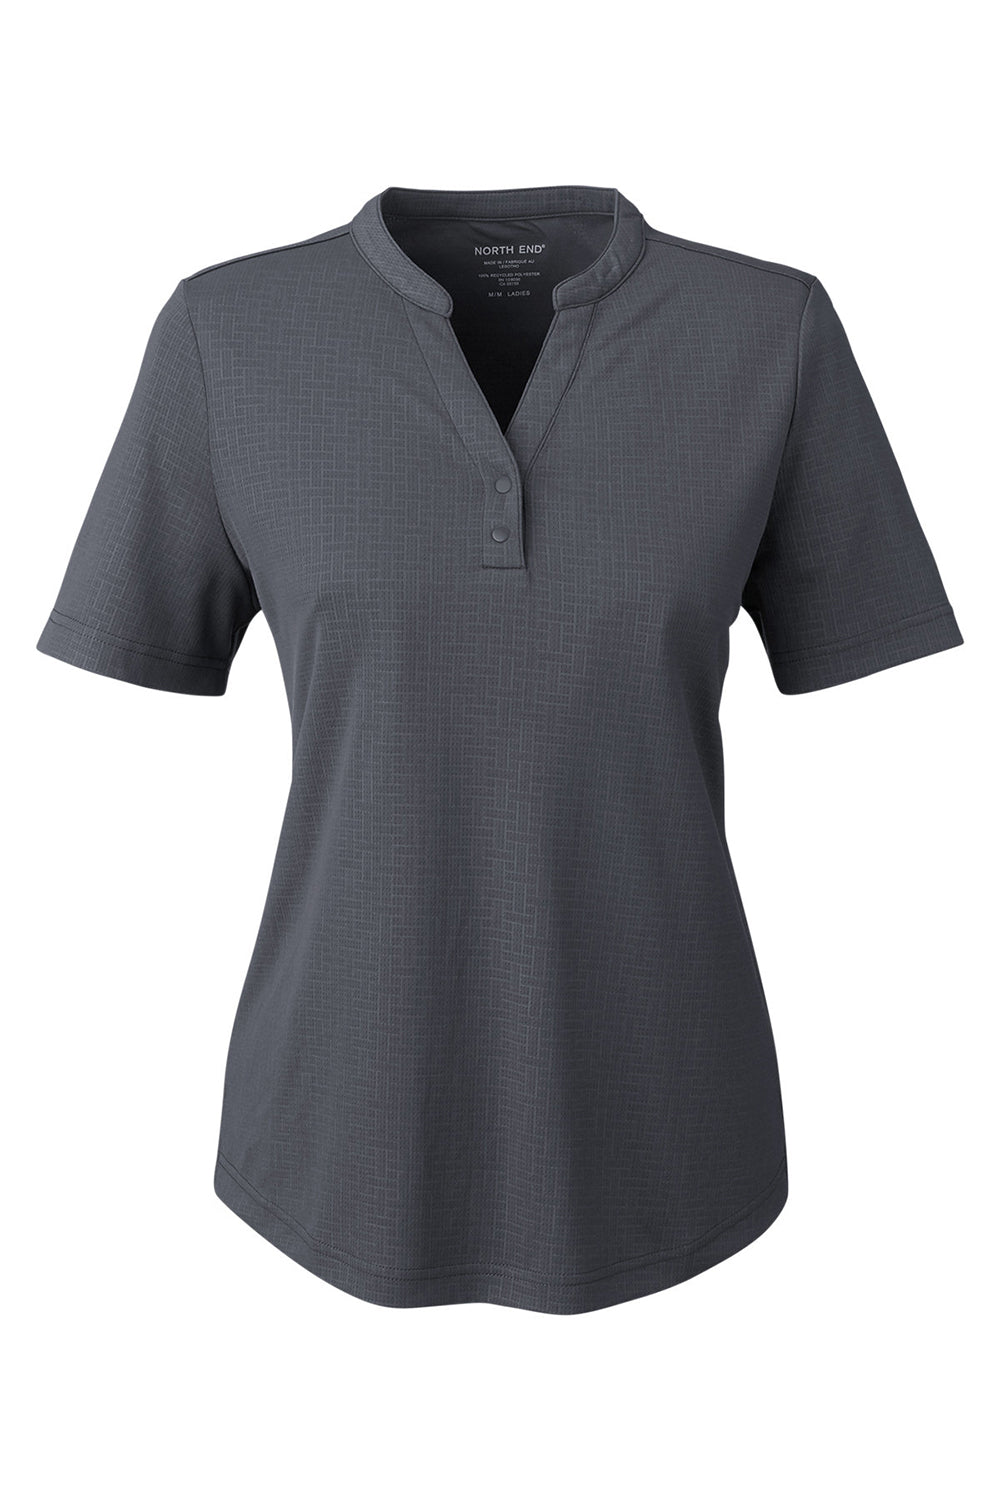 North End NE102W Womens Carbon Grey Replay Recycled Moisture Wicking Short  Sleeve Polo Shirt —